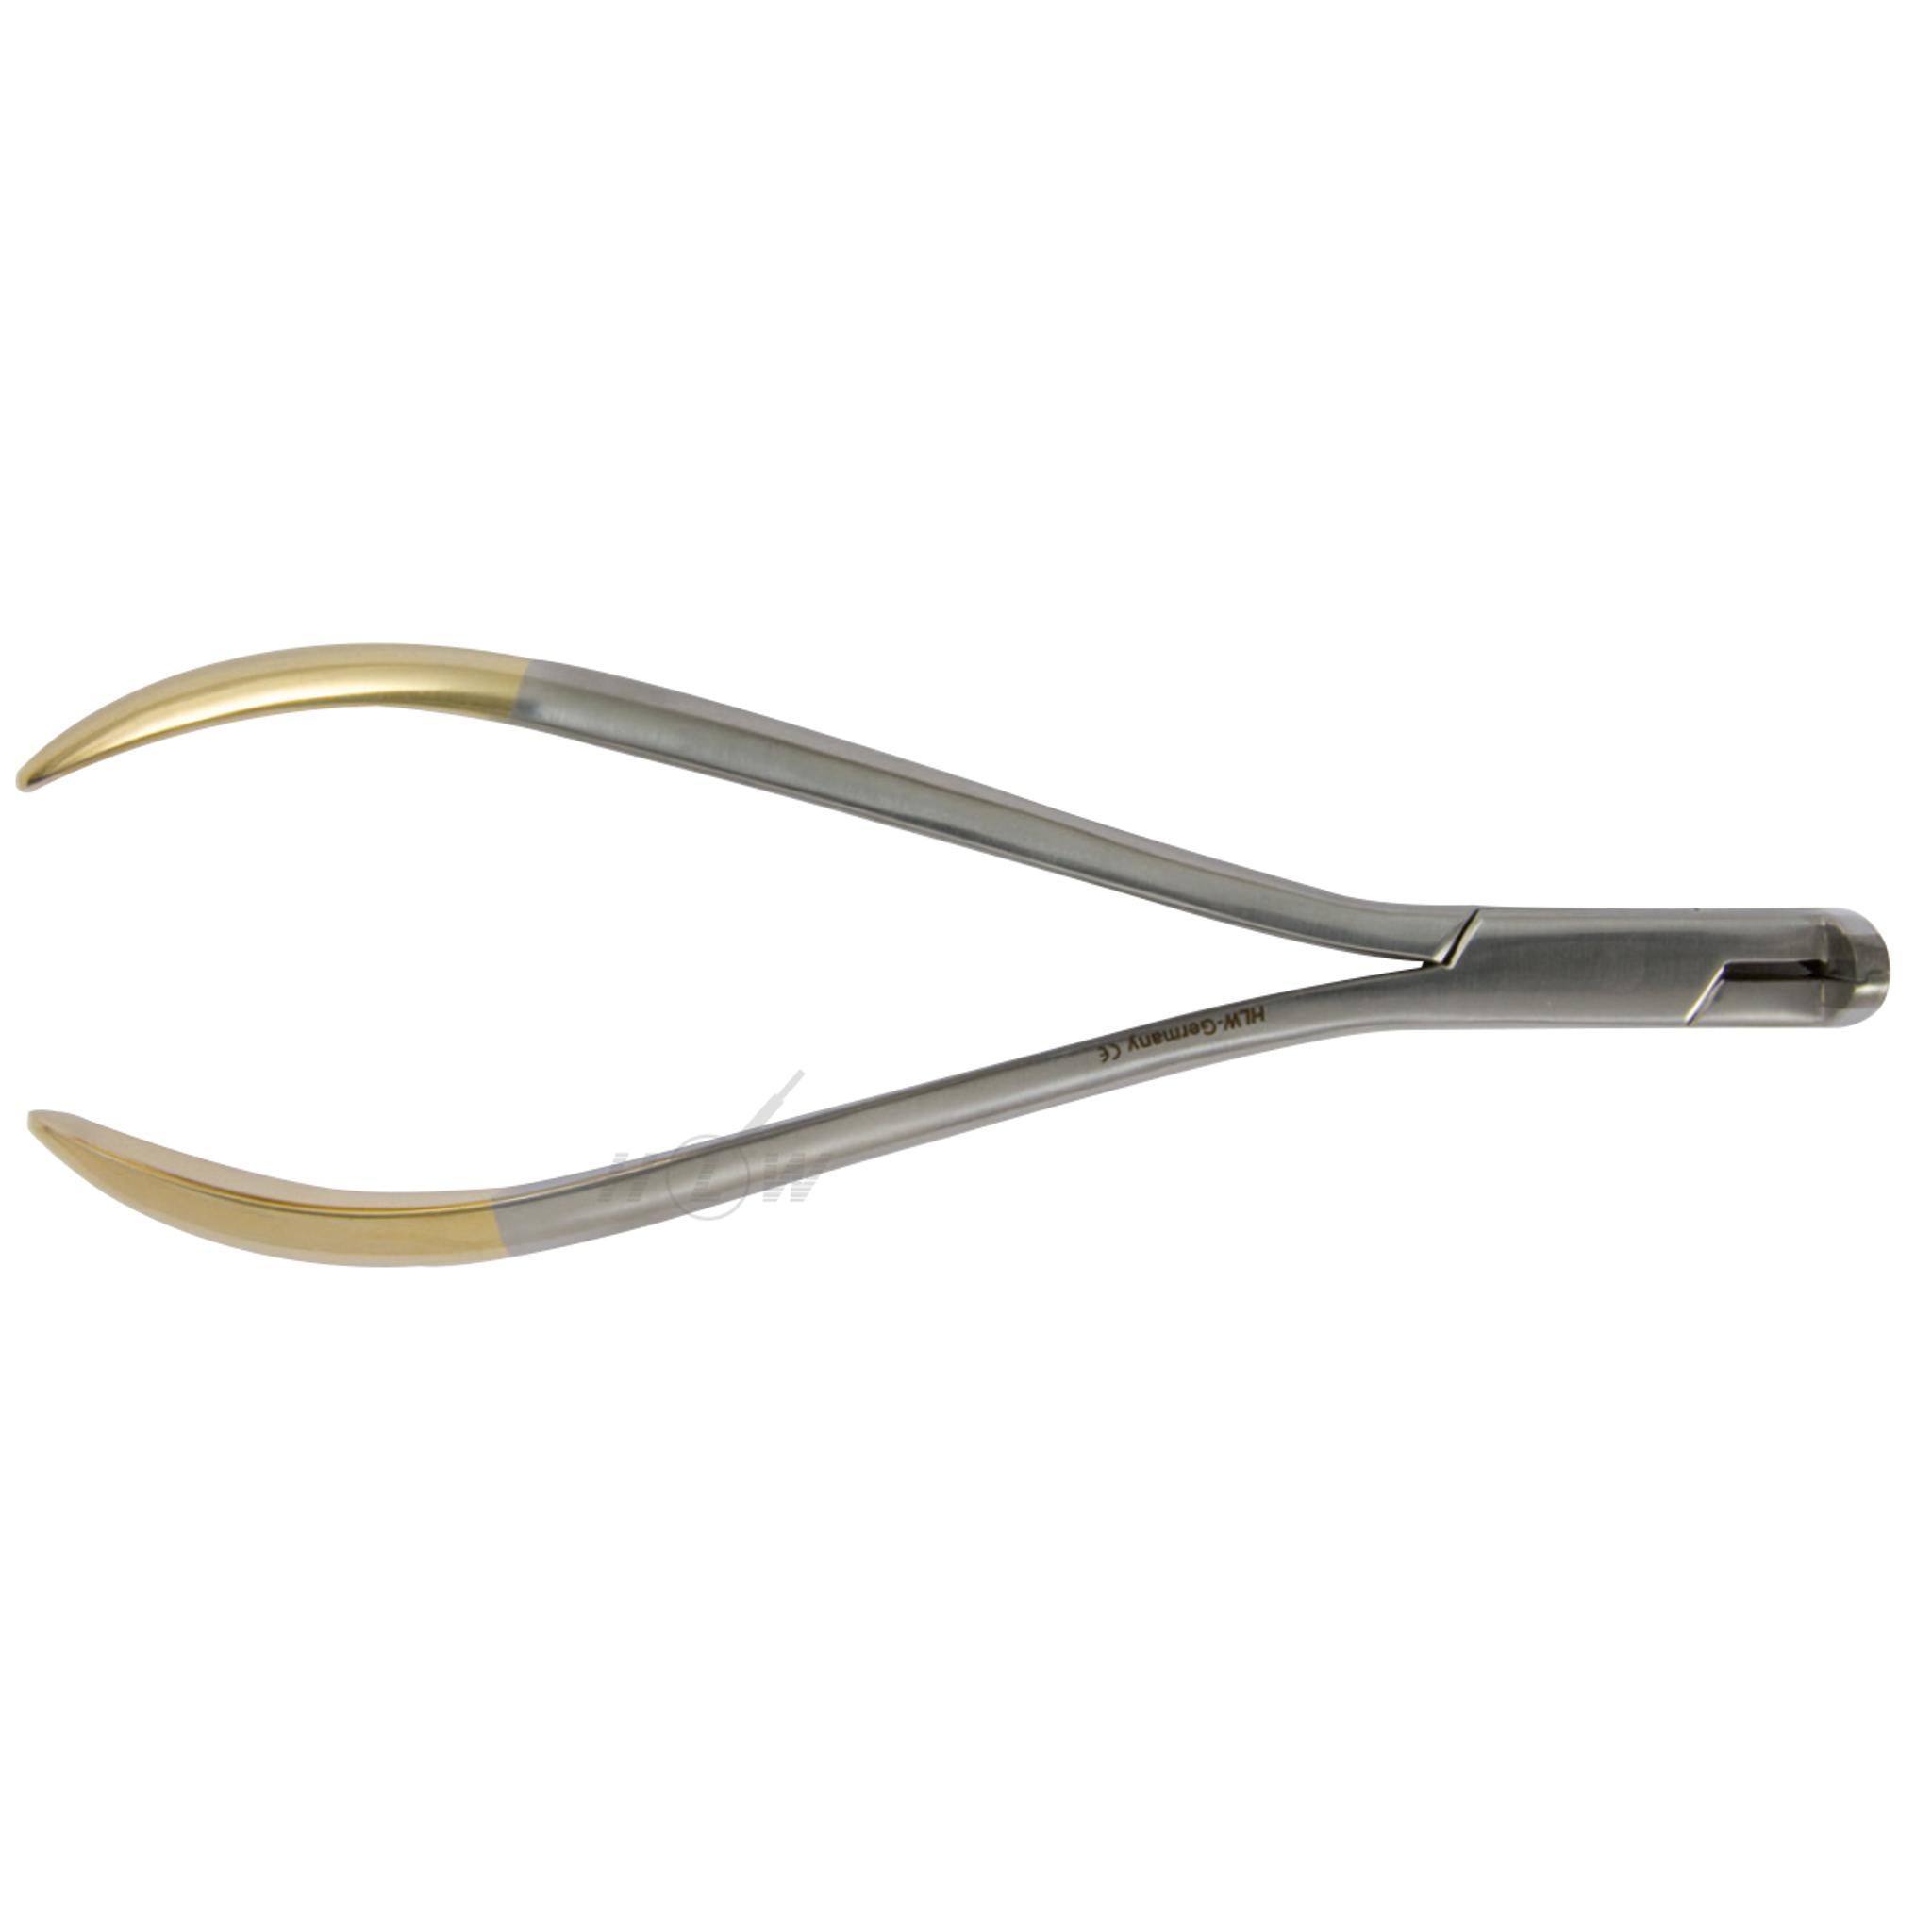 Wire cutting pliers Distal-Cutter made of tungsten carbide 15.0cm max. 0.5mm